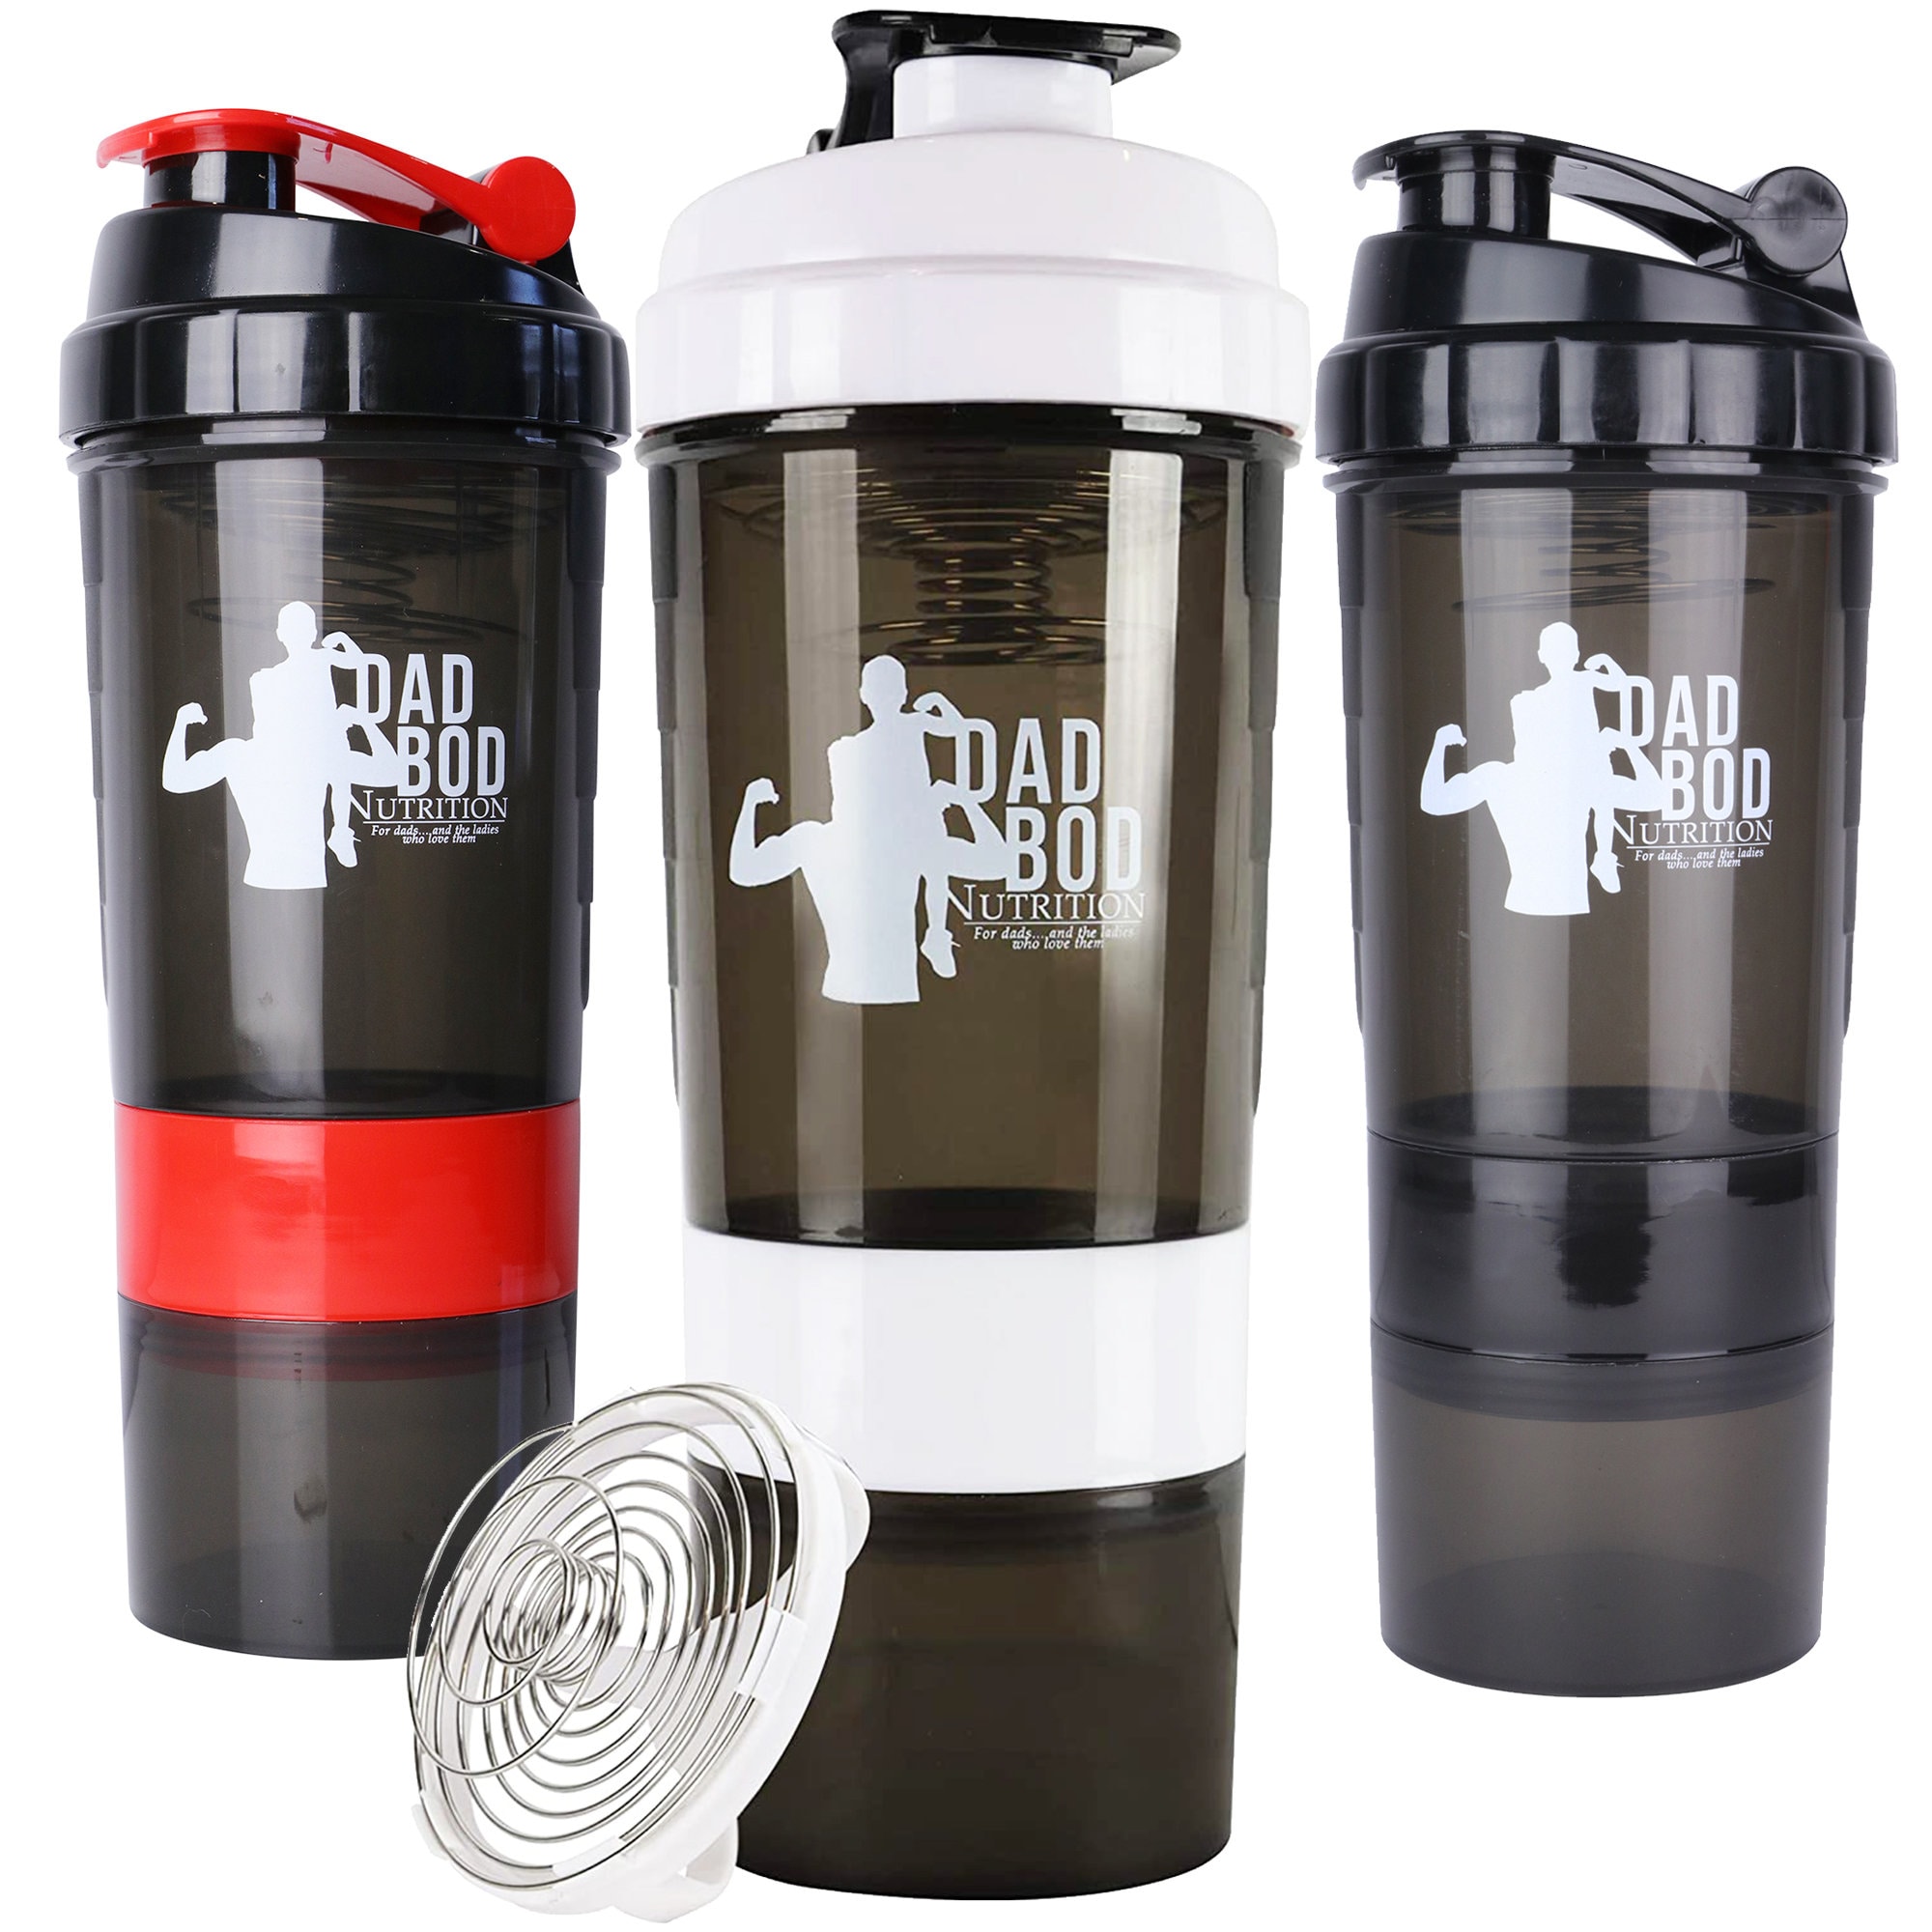 Dad Bod Nutrition Funny Protein Shaker Bottle 3 Part With Storage Red Trim  White Label